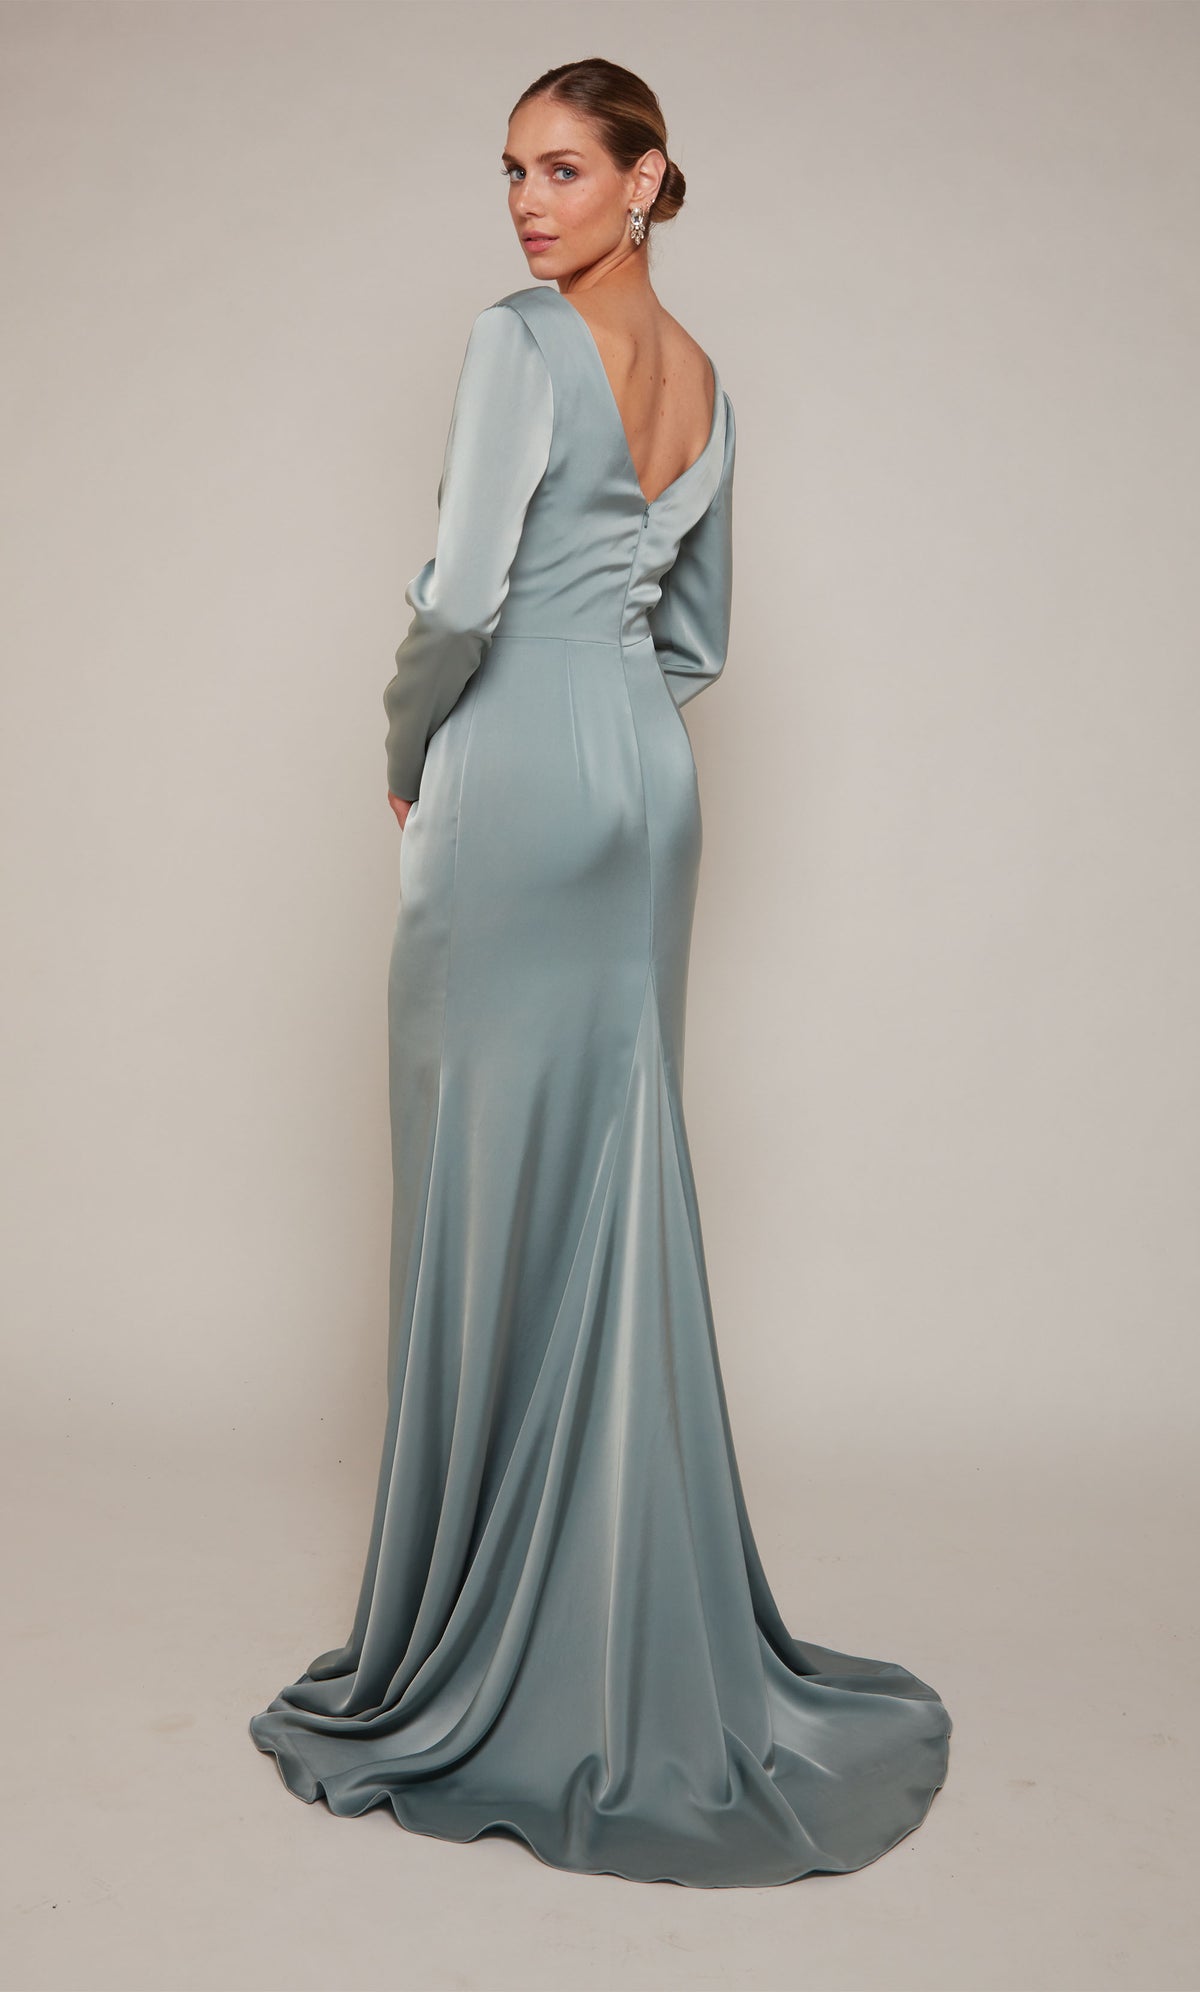 A chic, long sleeve evening gown with a V-shaped back and a train, in a sheen sage green color.